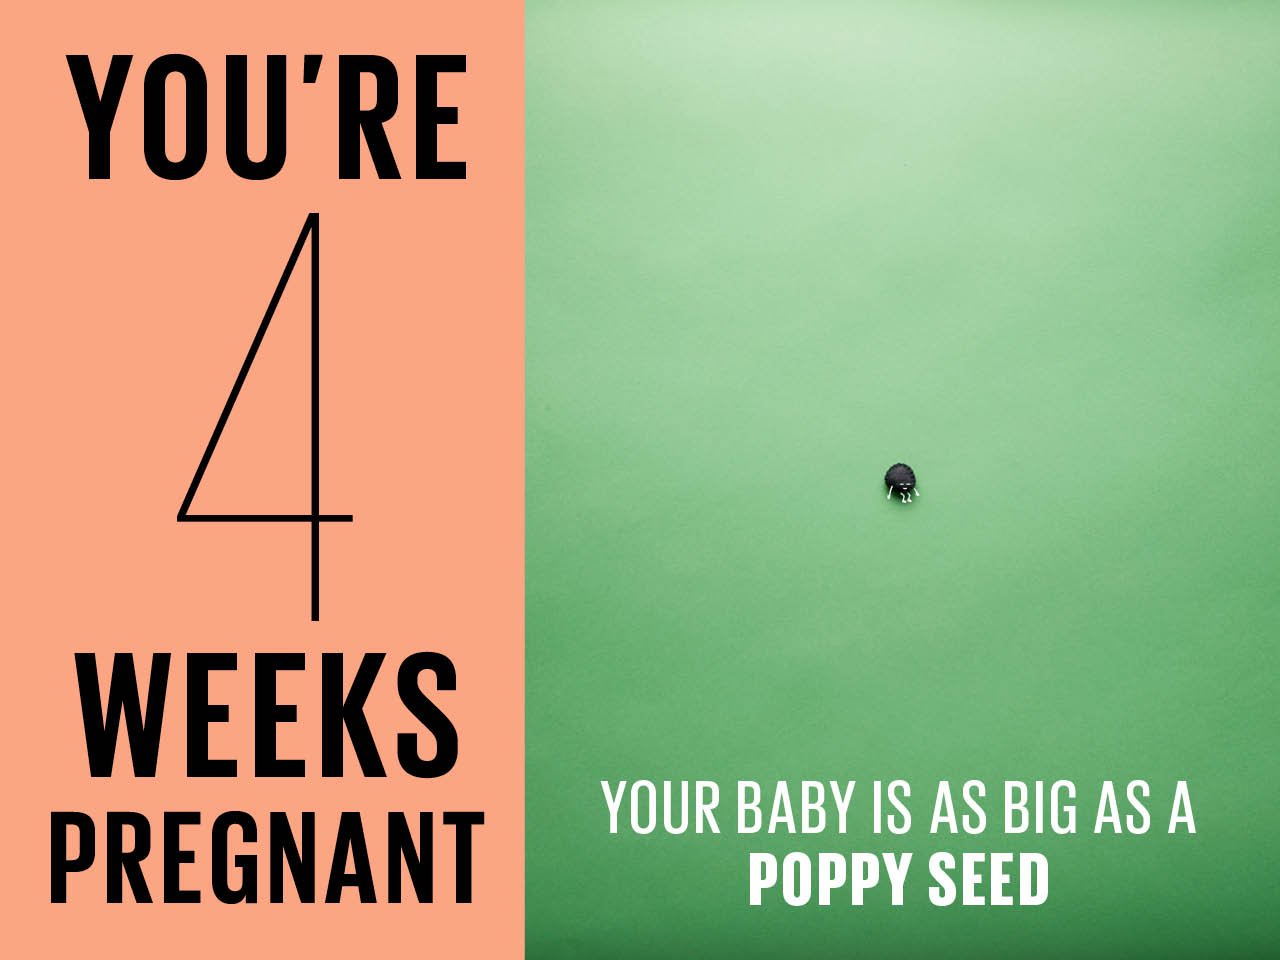 Felt poppy seed used to show how big baby is at 4 weeks